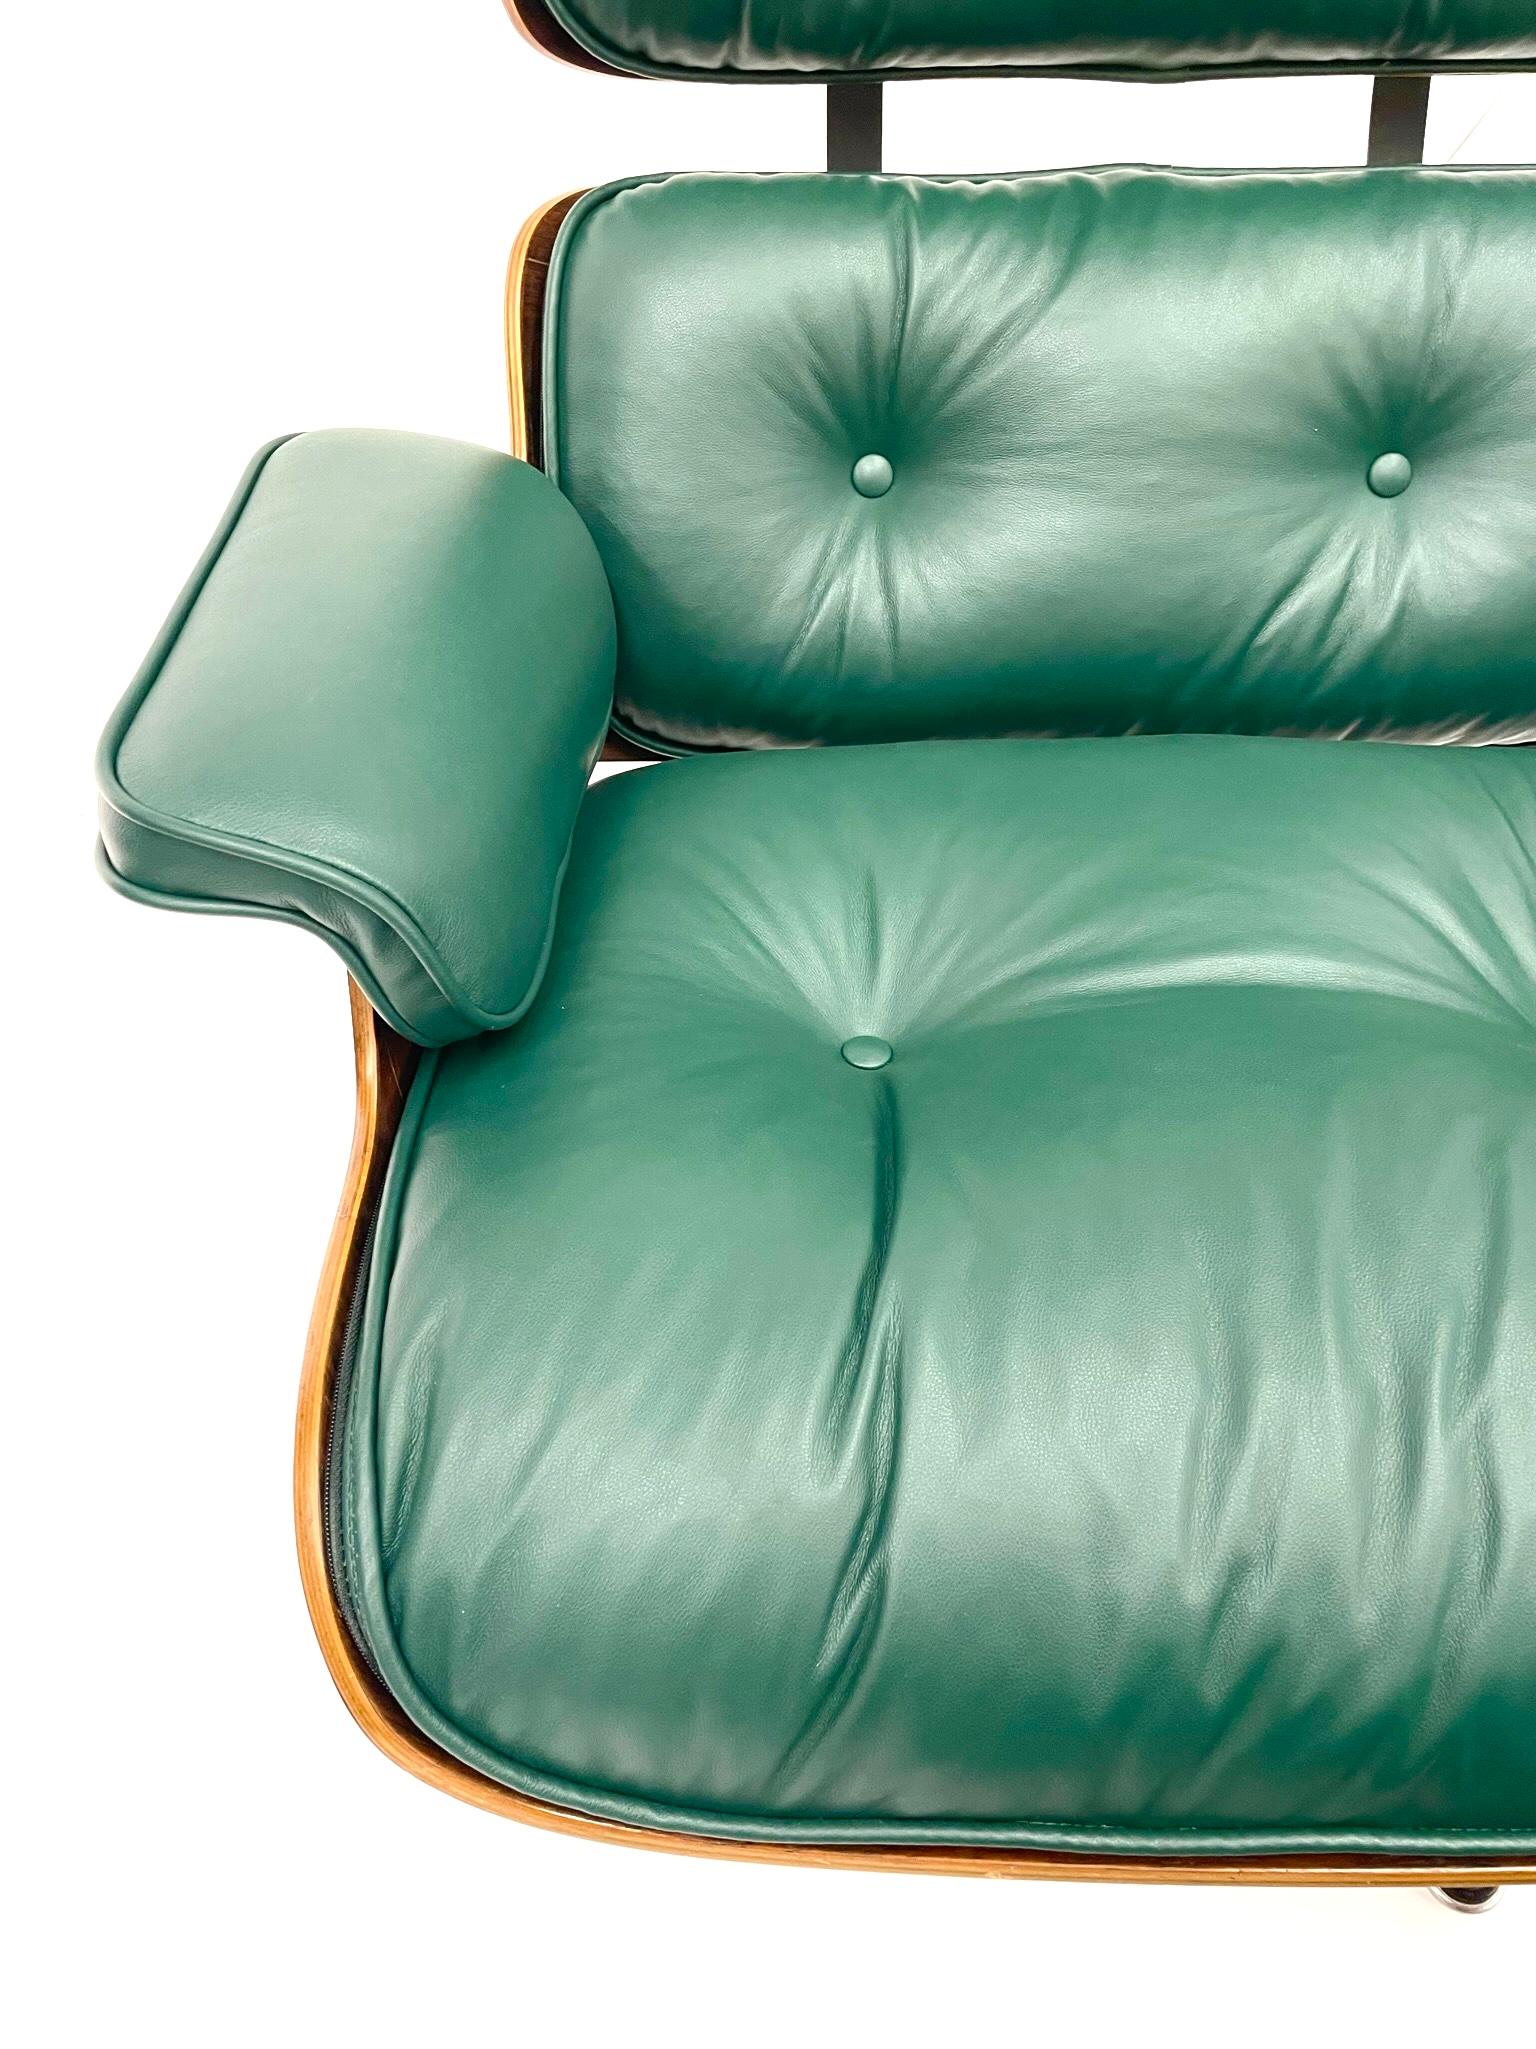 Mid-20th Century Eames Lounge Chair and Ottoman in Hunter Green and Rosewood, 2nd Generation circ